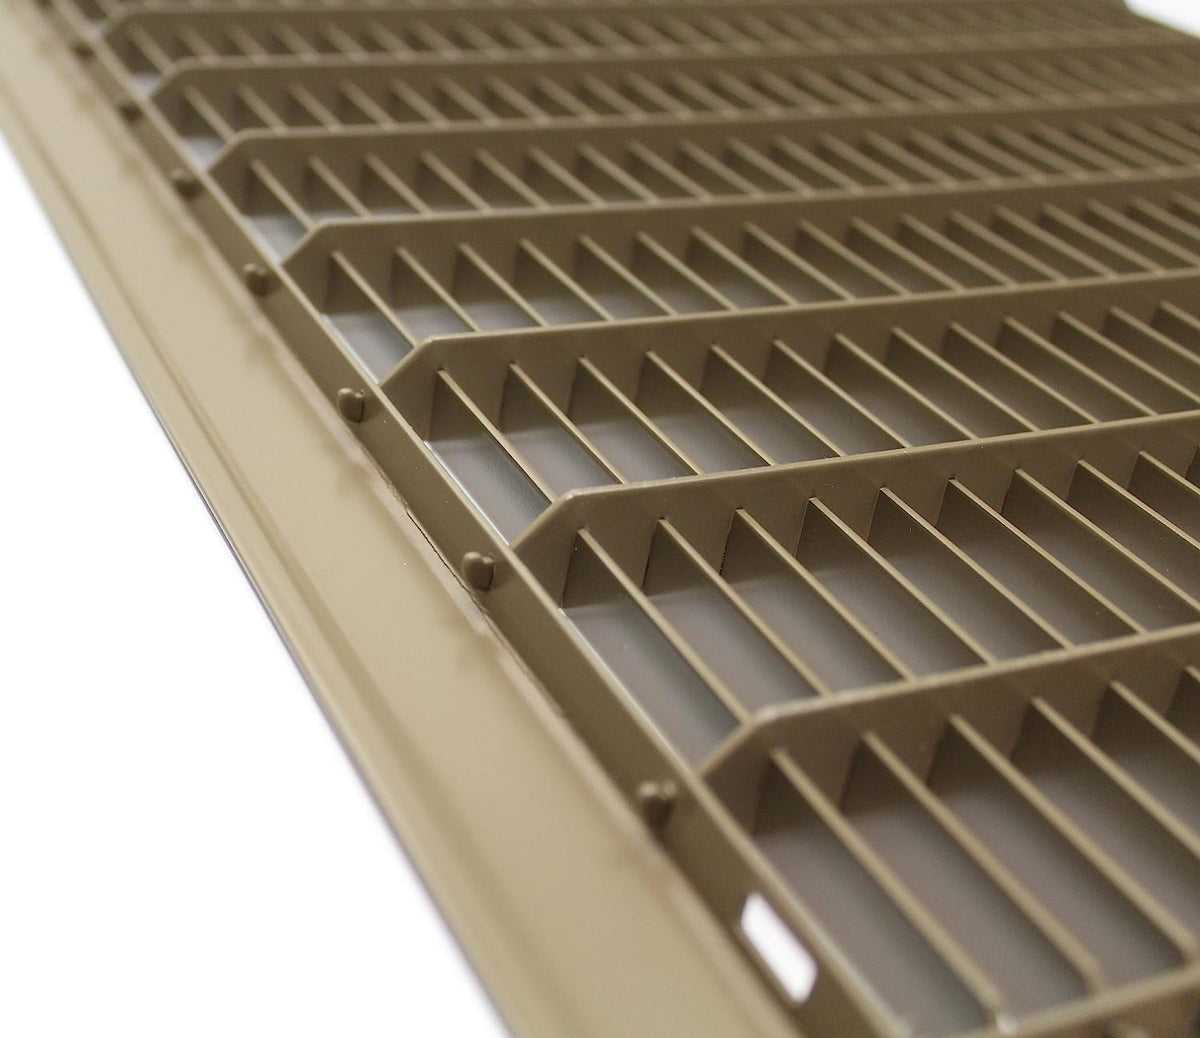 18&quot; X 18&quot; Heavy Duty Floor Grille - Fixed Blades Air Grille - Brown [Outer Dimensions: 19.75 X 19.75]